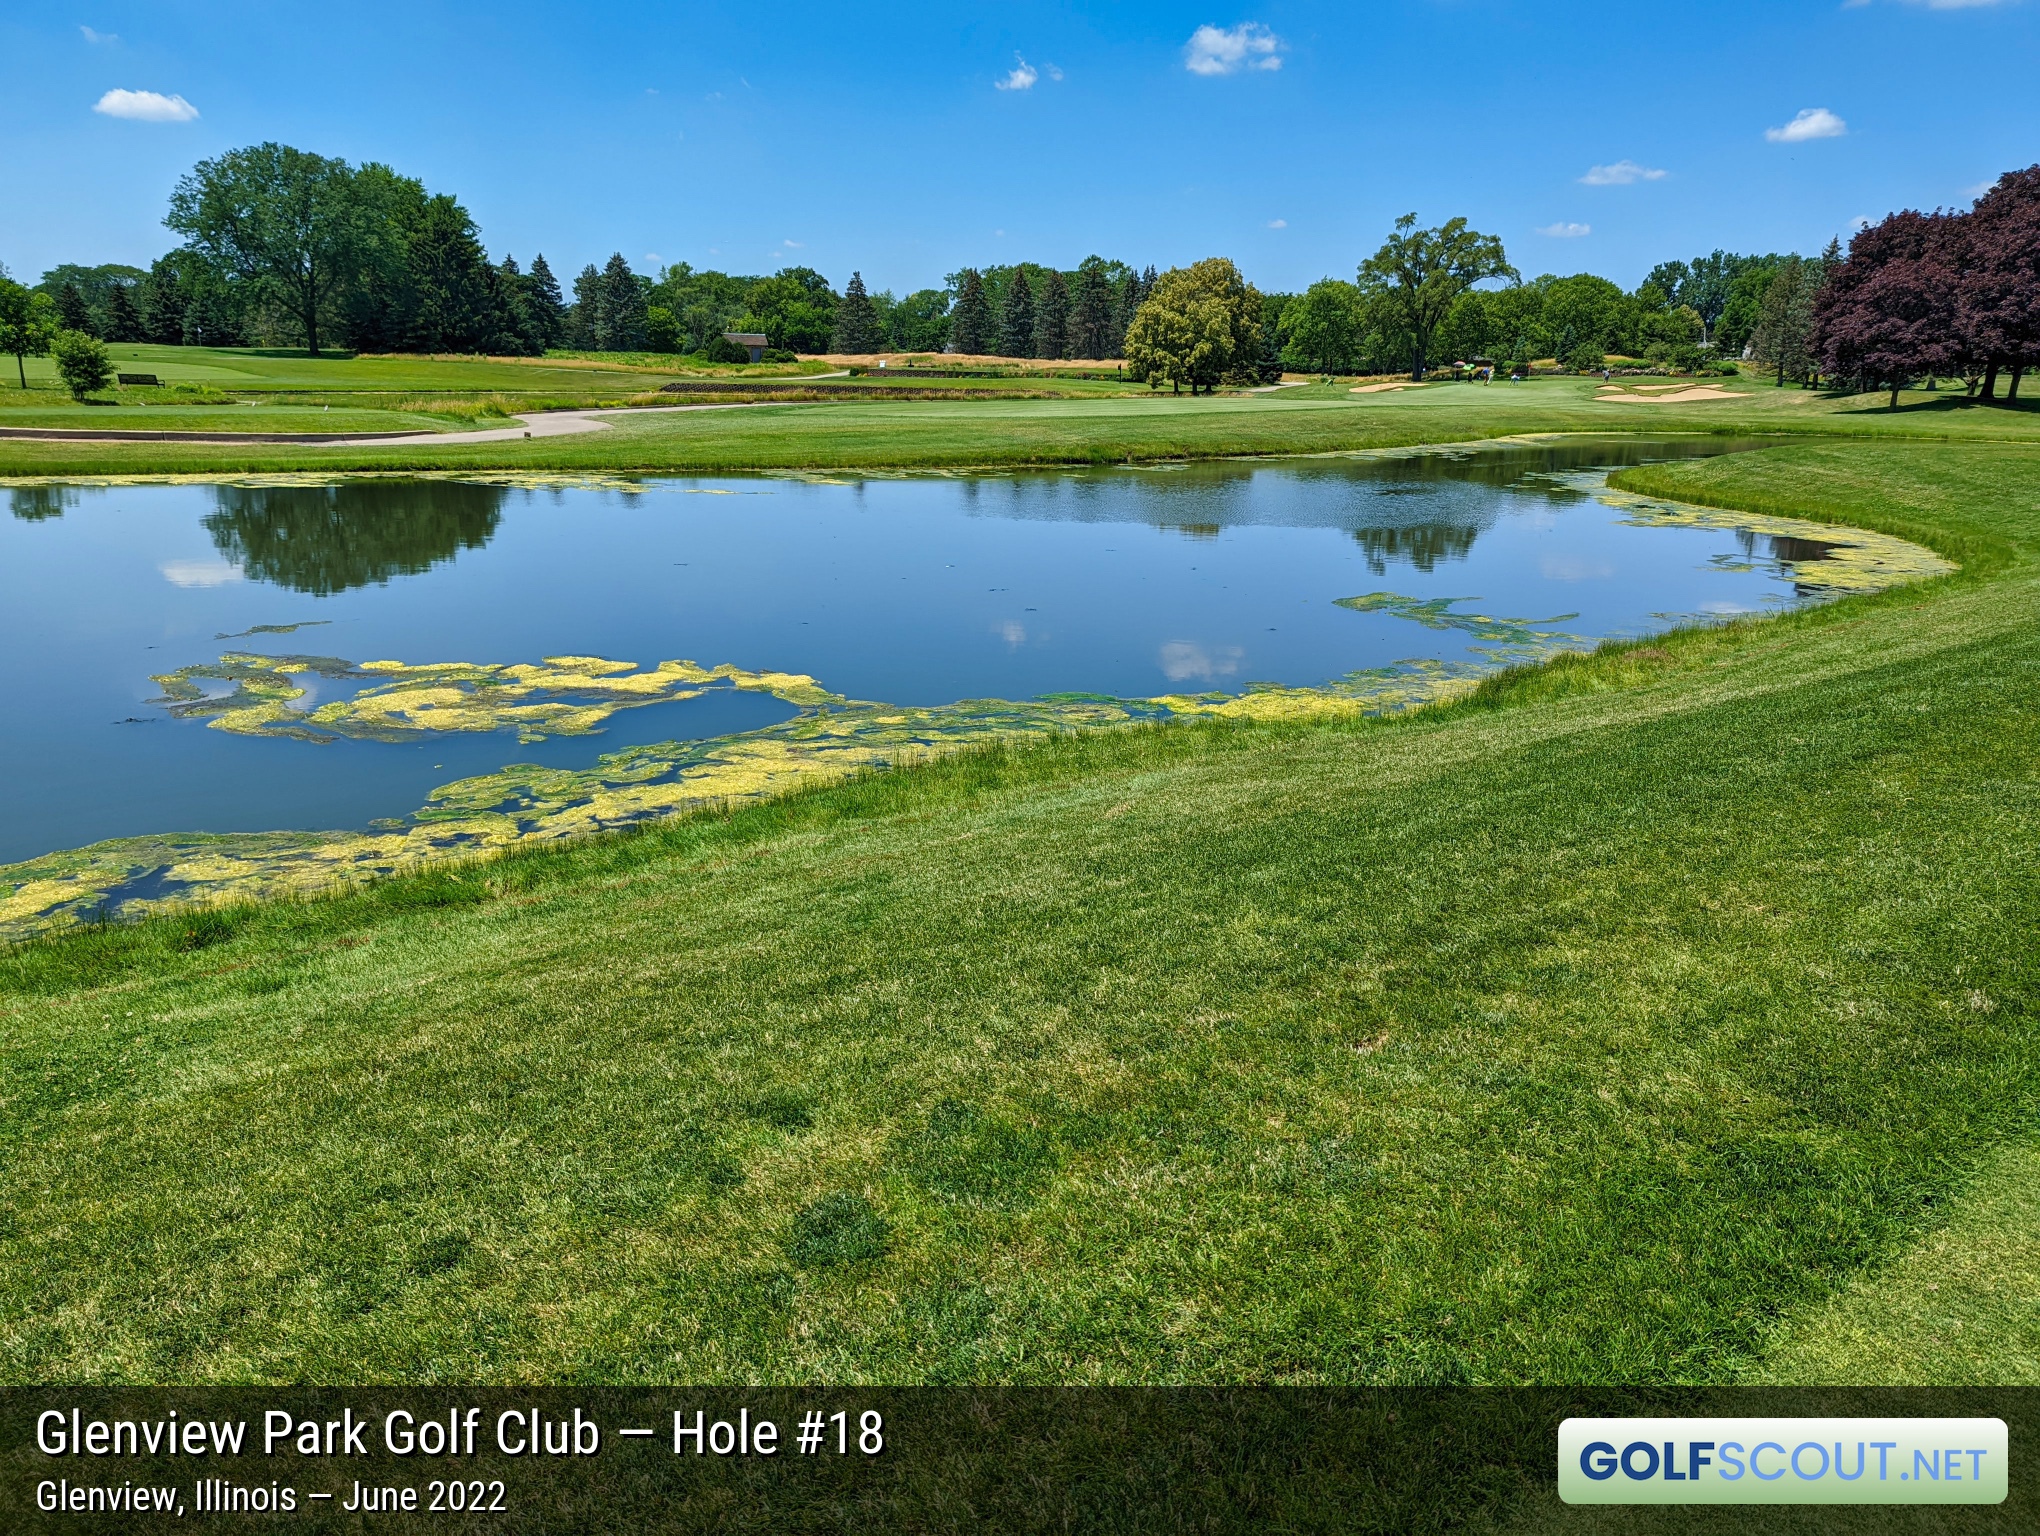 Photo of hole #18 at Glenview Park Golf Club in Glenview, Illinois. 